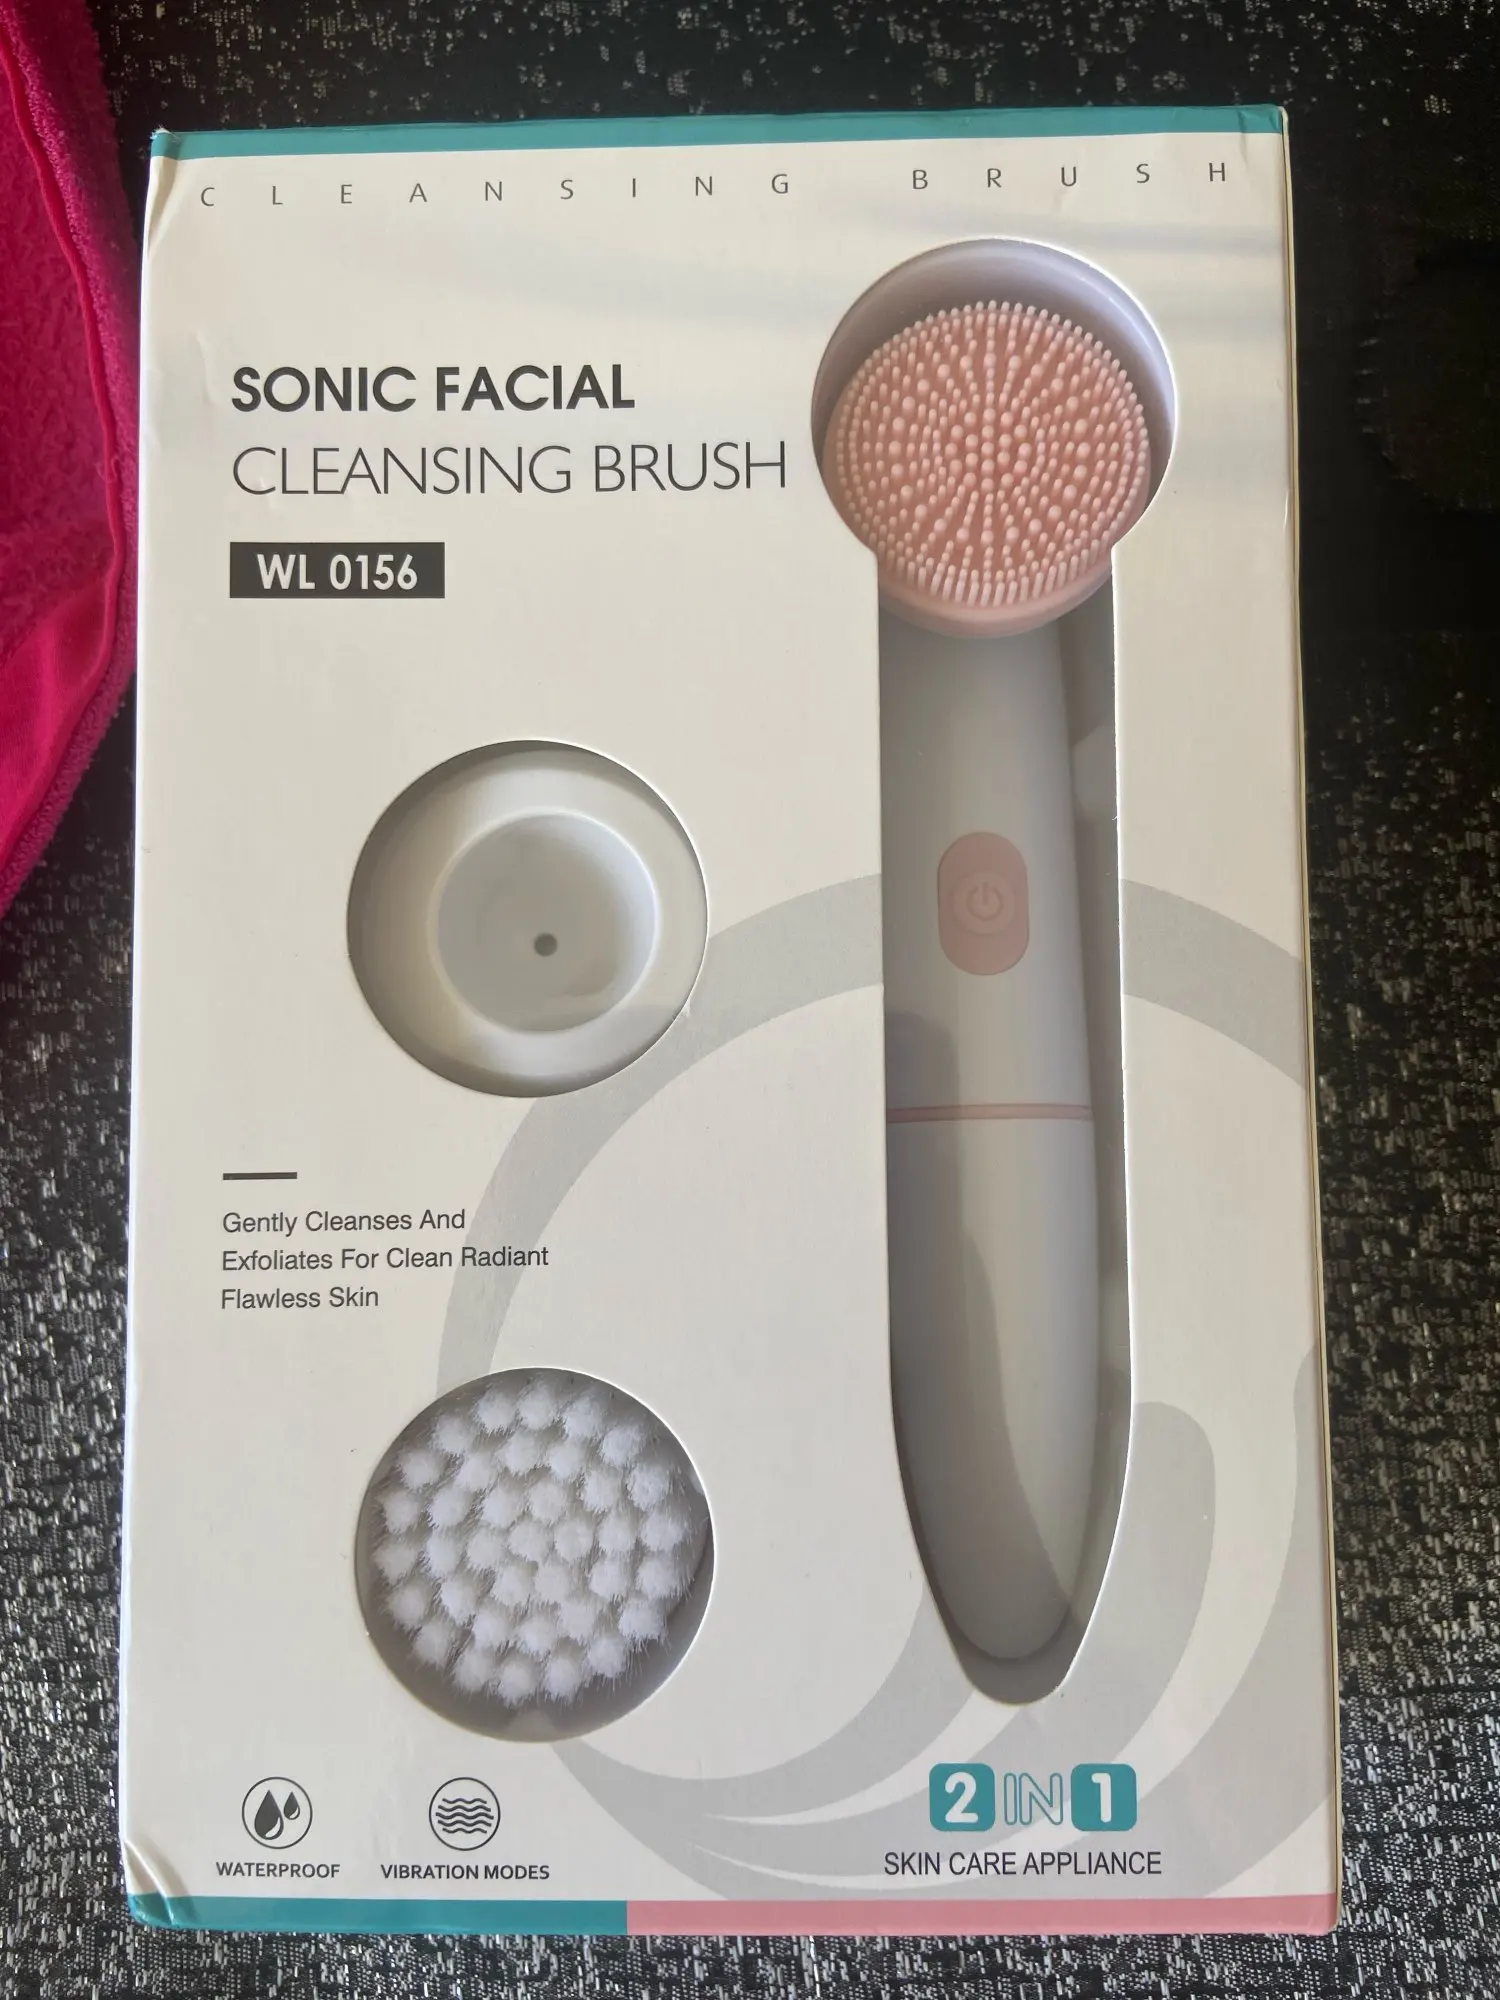 Electric Face Cleansing Brush For Facial Skin Care Wash Sonic Vibration Massage Tool 2 in 1 Acne Pore Blackhead Silicone Cleaner photo review